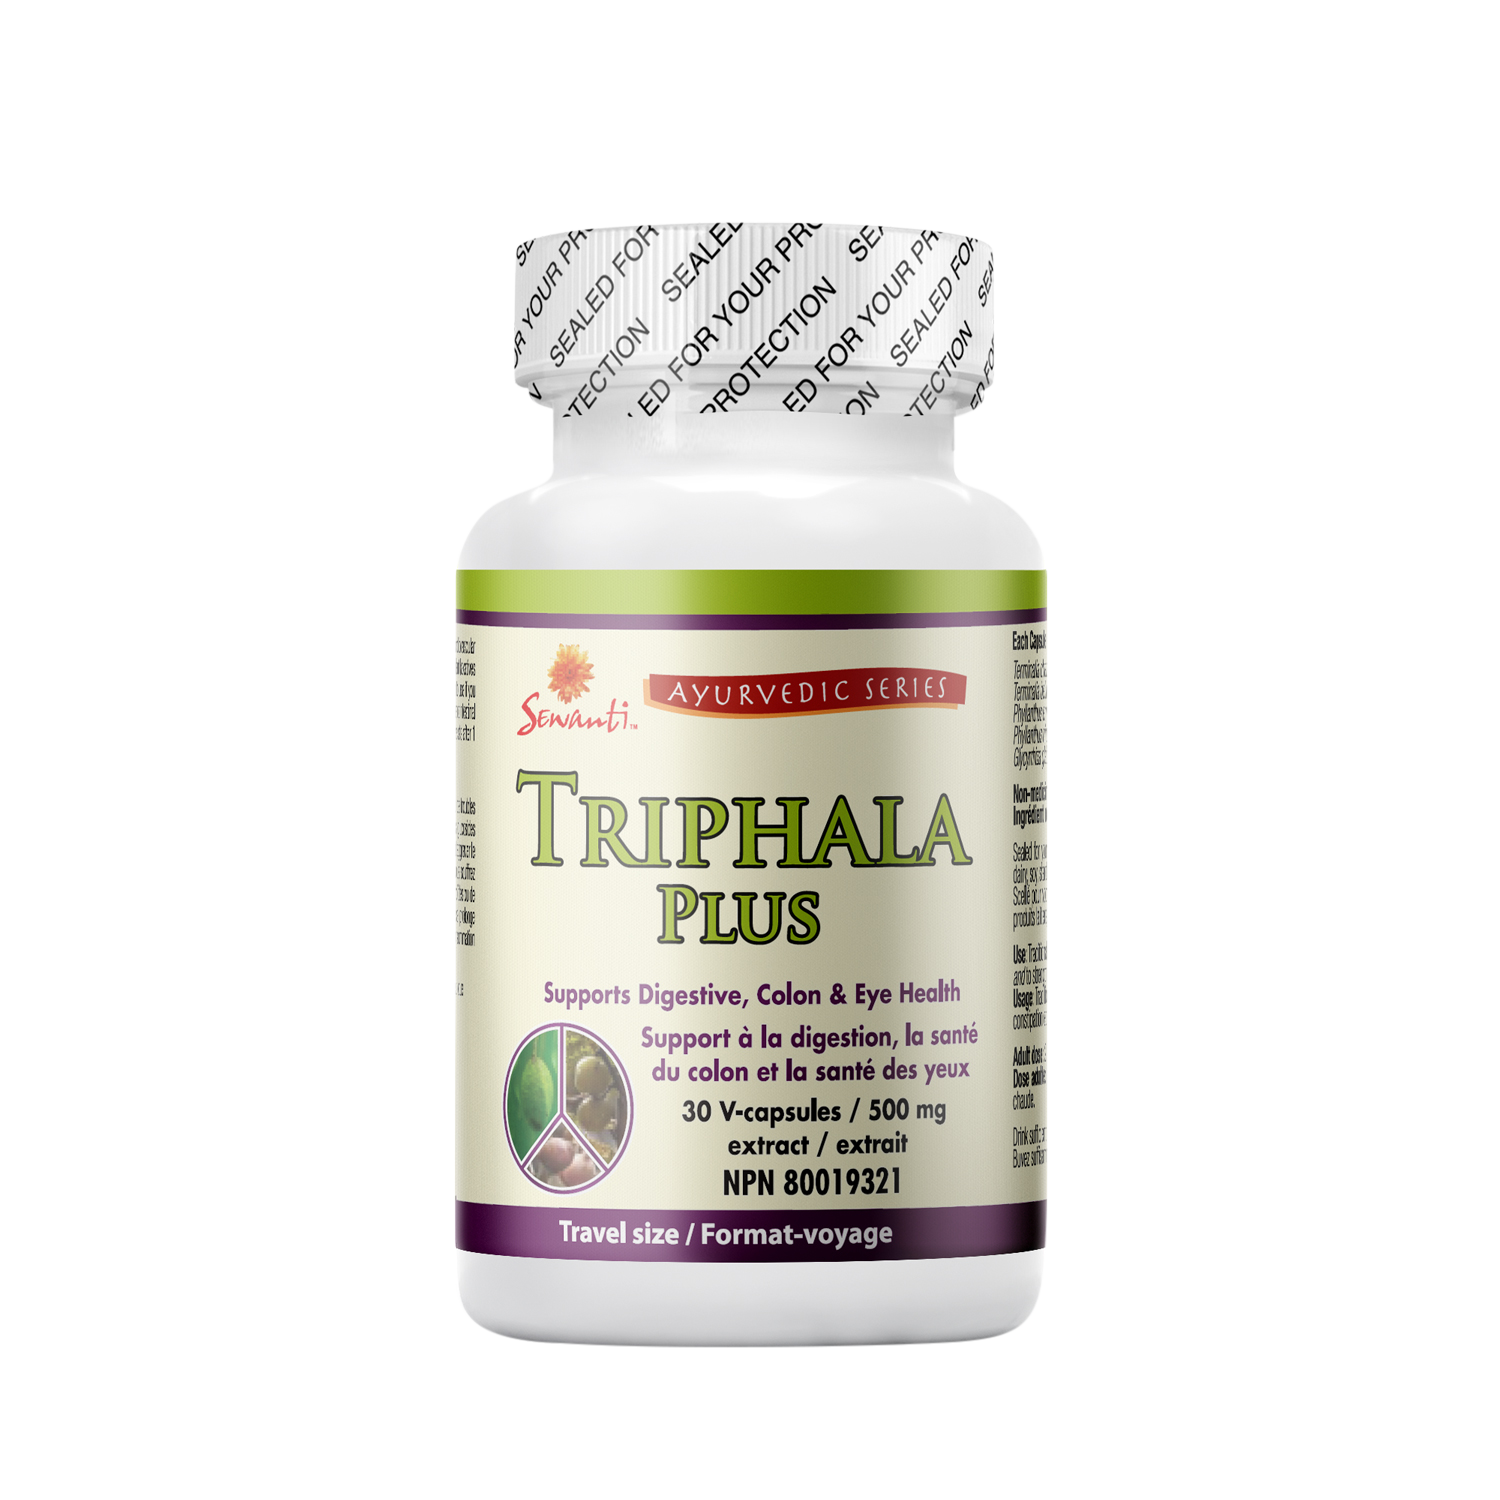 Ayurvedic Triphala Plus Capsules - Triphala herbal formula literary means 3 fruits but Sewanti Triphala plus formulation has 2 added ingredients. Traditionally used in Ayurvedic medicine in the treatment of indigestion, constipation, and strengthening the eyes.